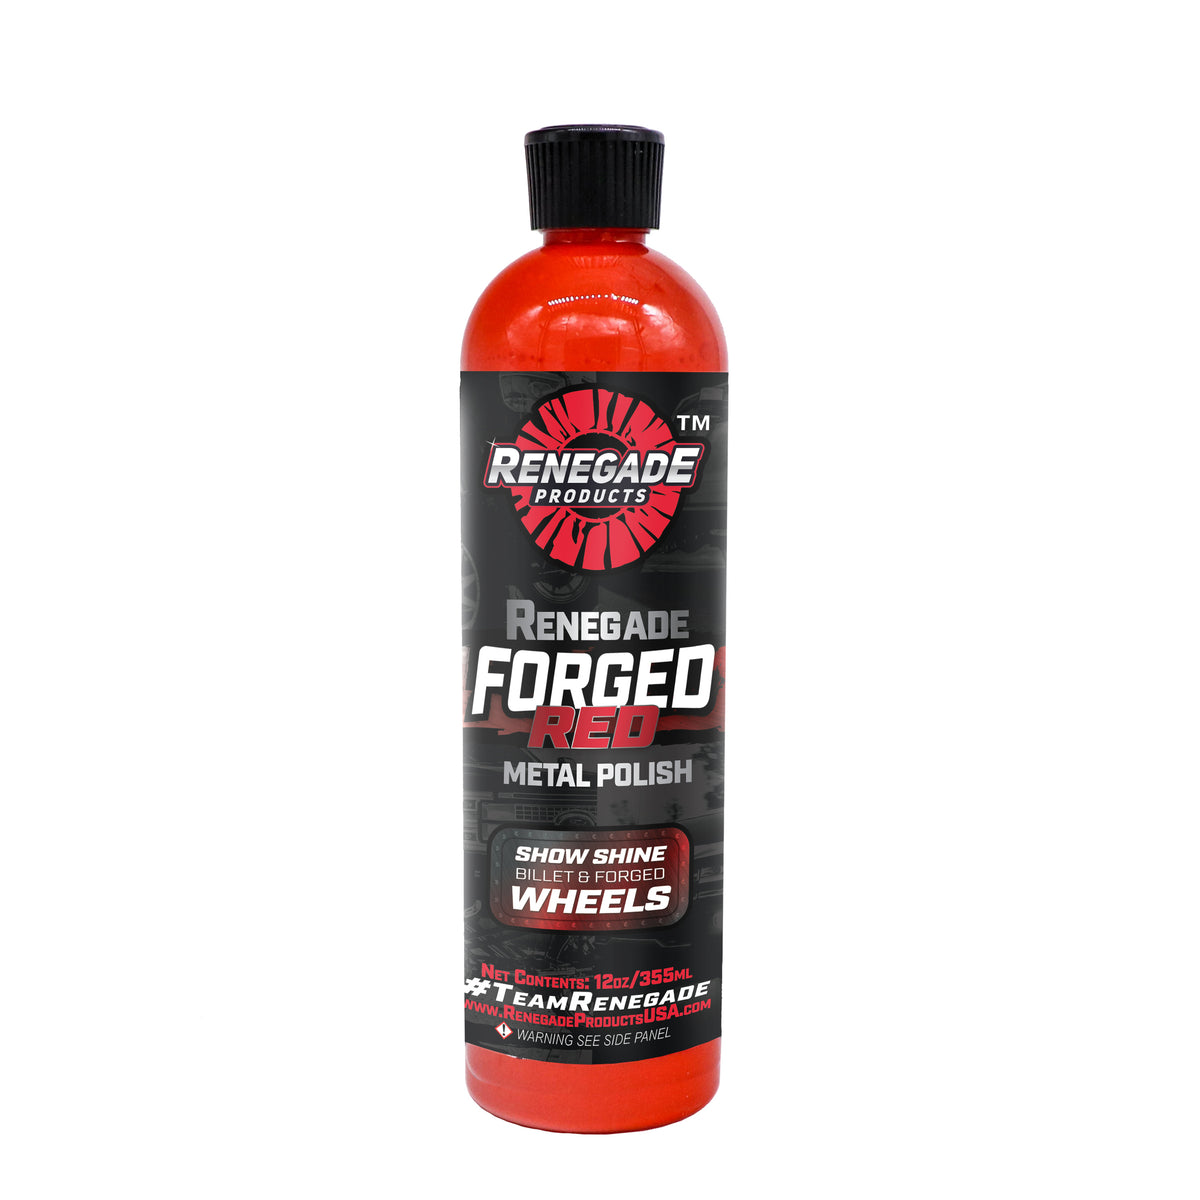 Renegade Forged Red Metal Polish - Renegade Products USA